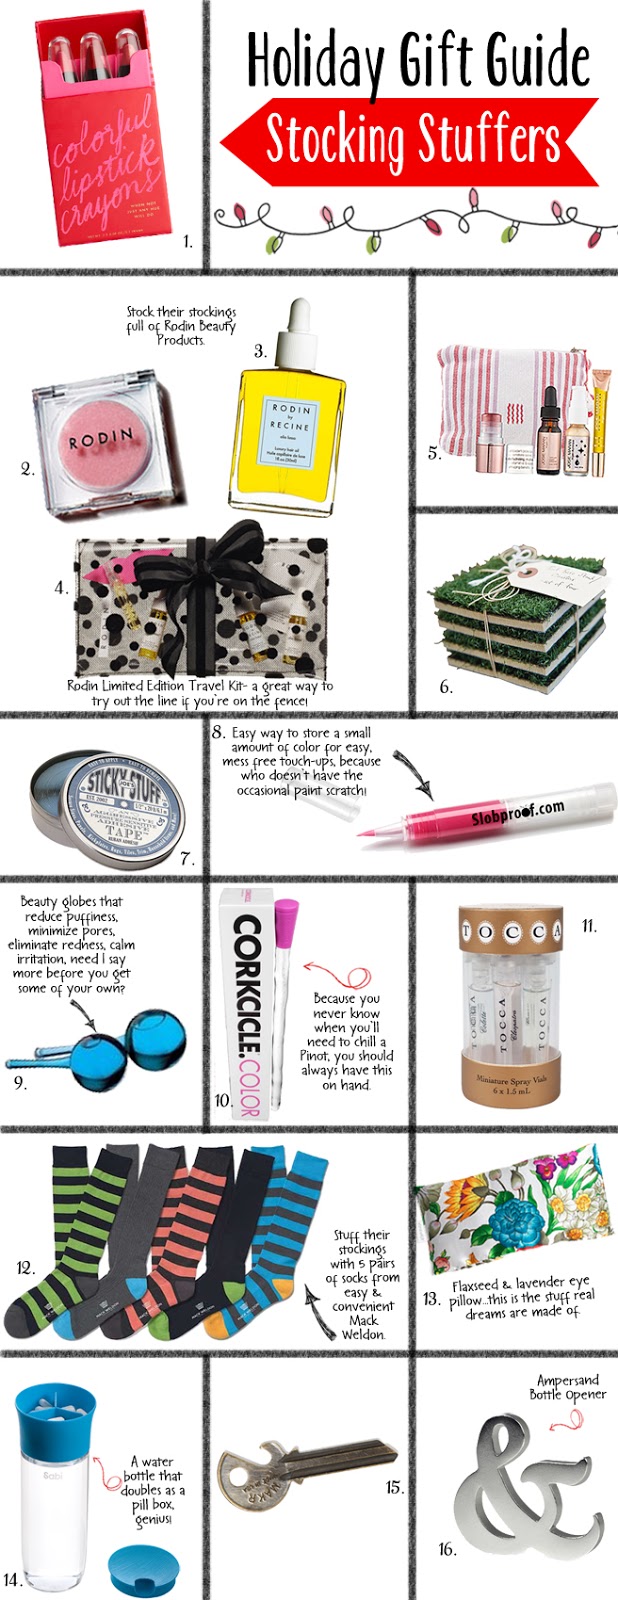 Holiday Gift Guide Stocking Stuffers 2012